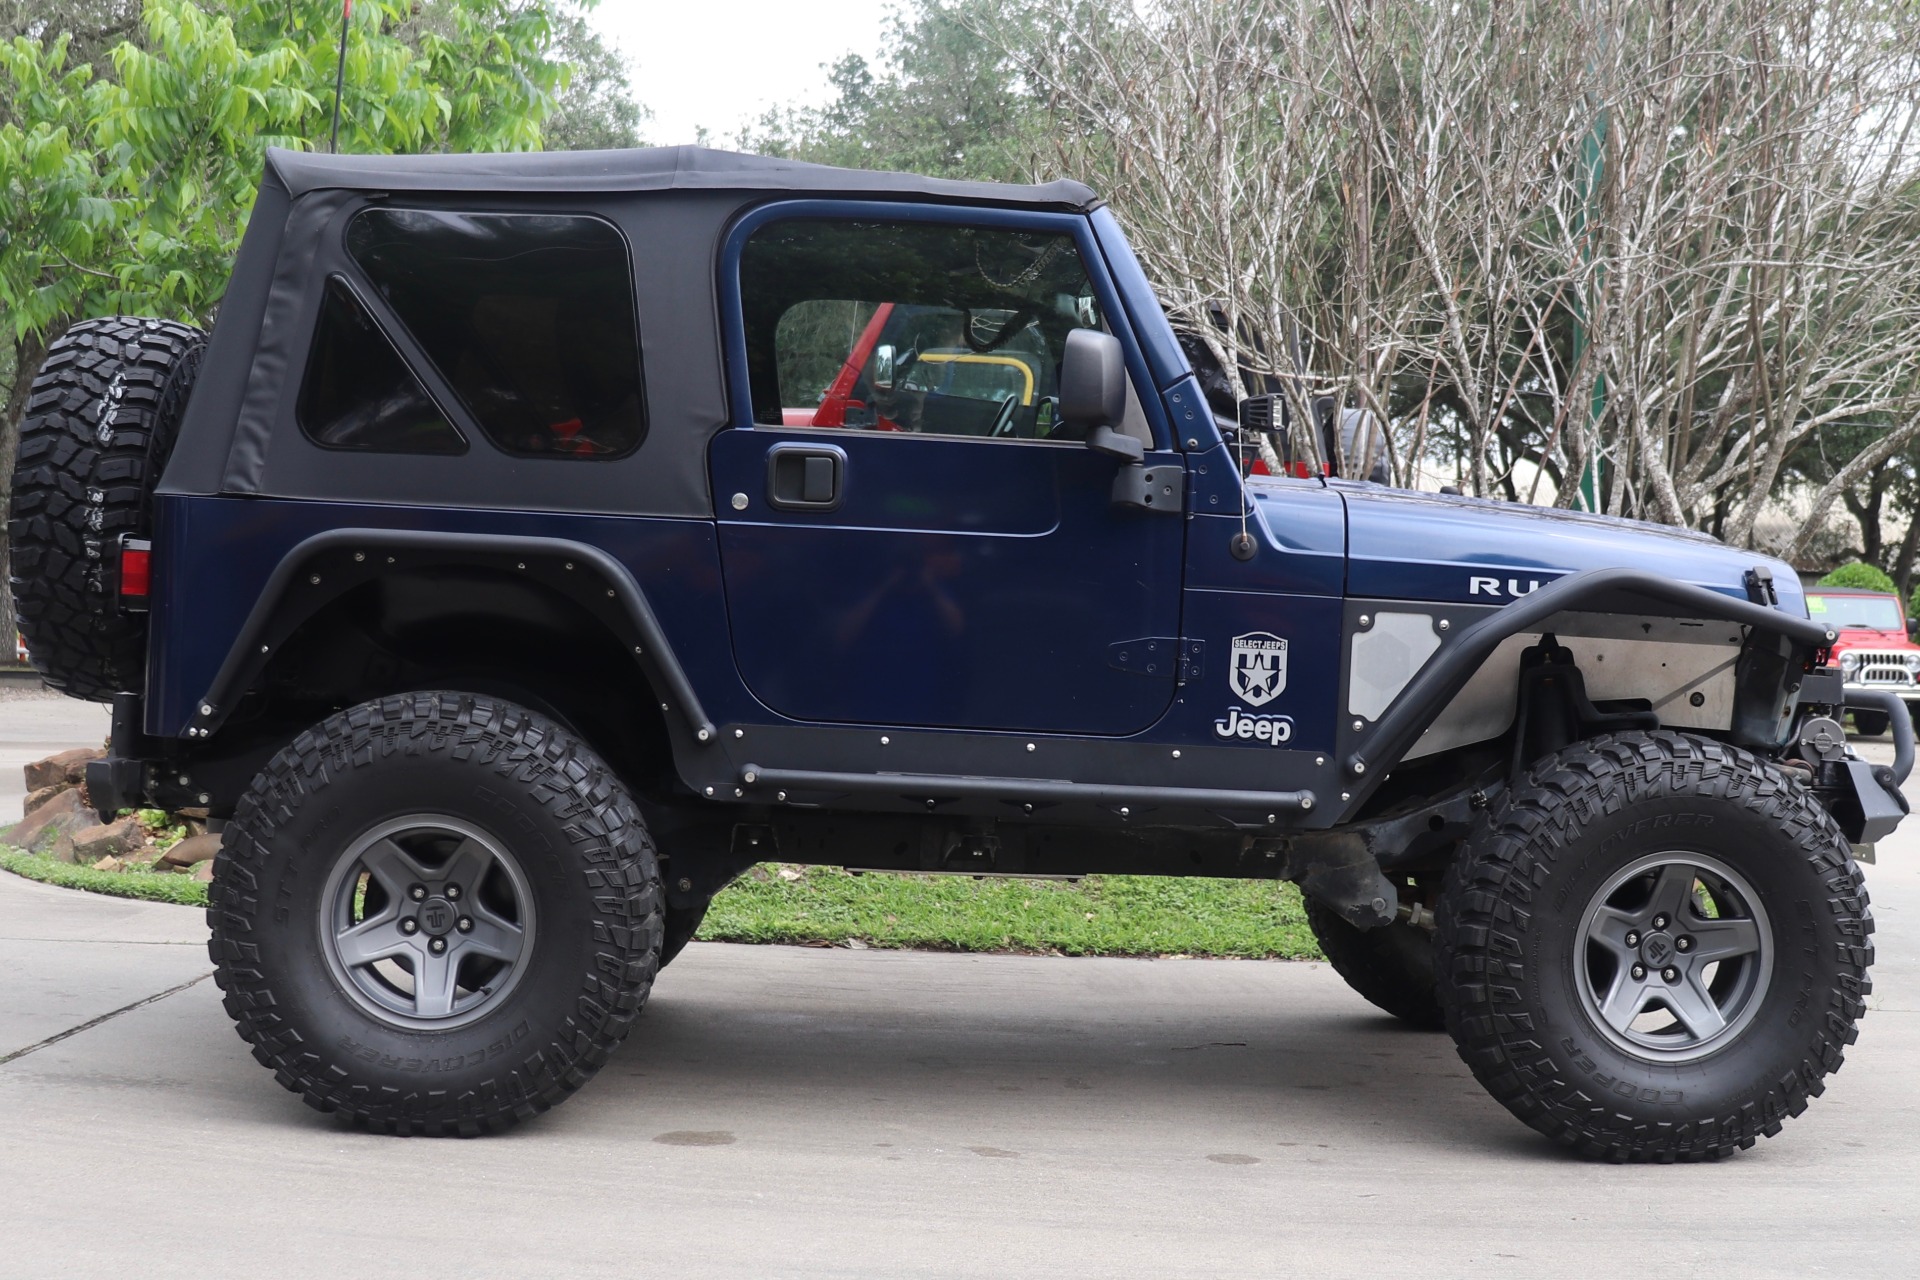 Used 2004 Jeep Wrangler Rubicon For Sale ($18,995) | Select Jeeps Inc.  Stock #766892